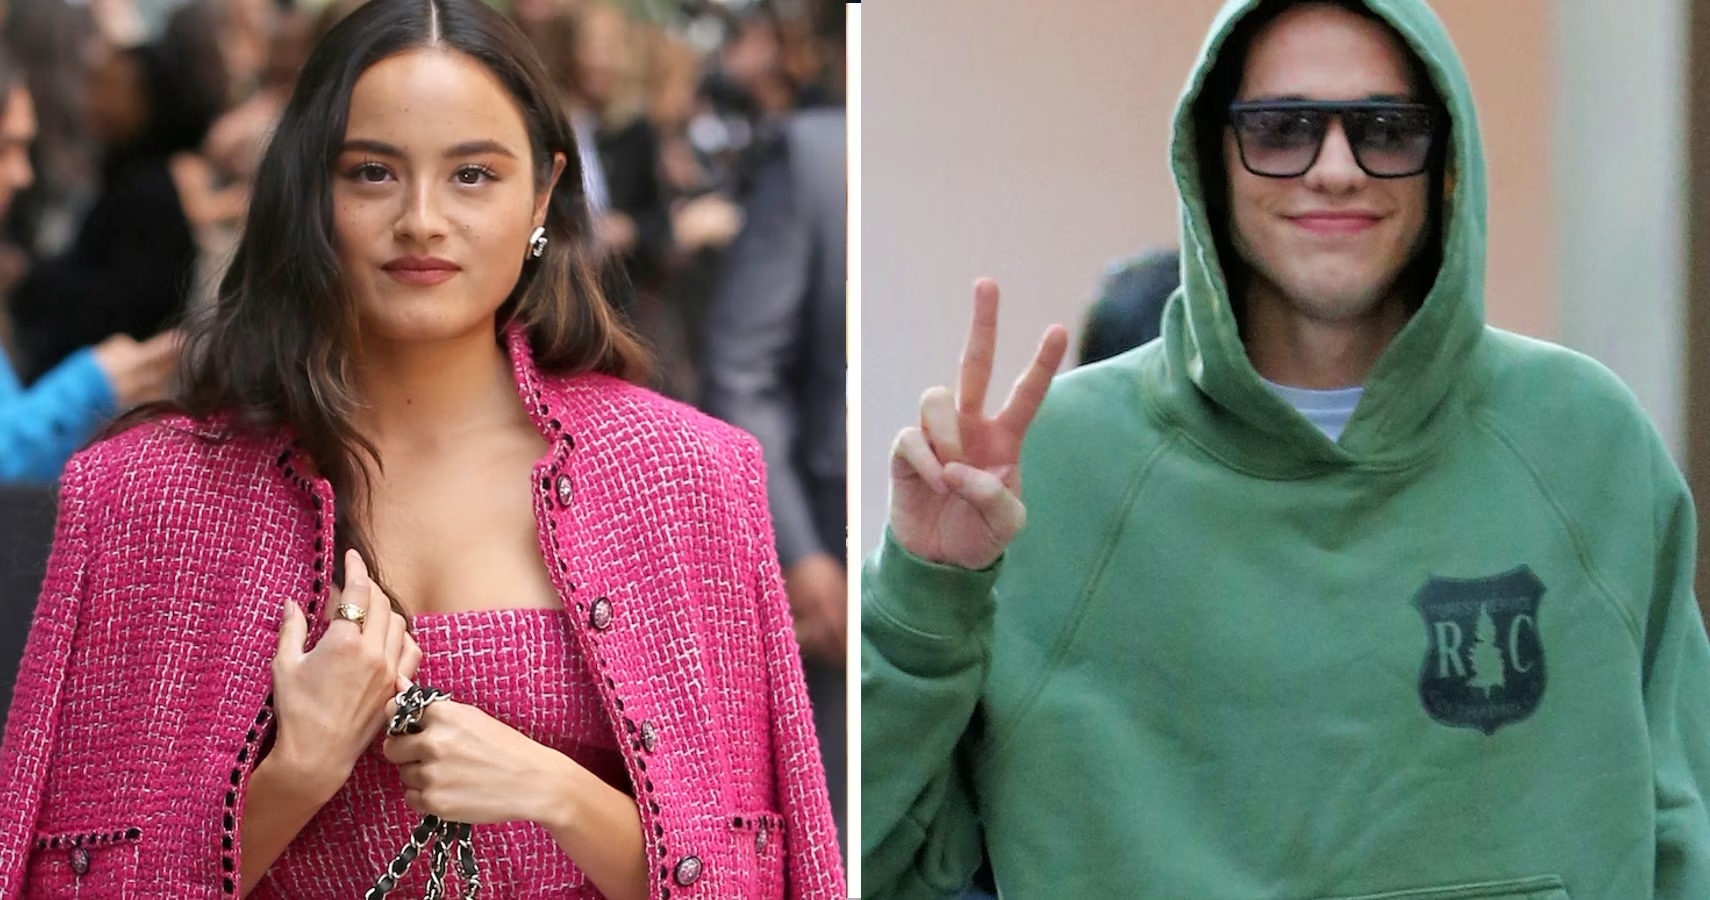 Pete Davidson And Chase Sui Wonders Break Up Shortly After Kim Kardashian Dissed Her Romance With Him